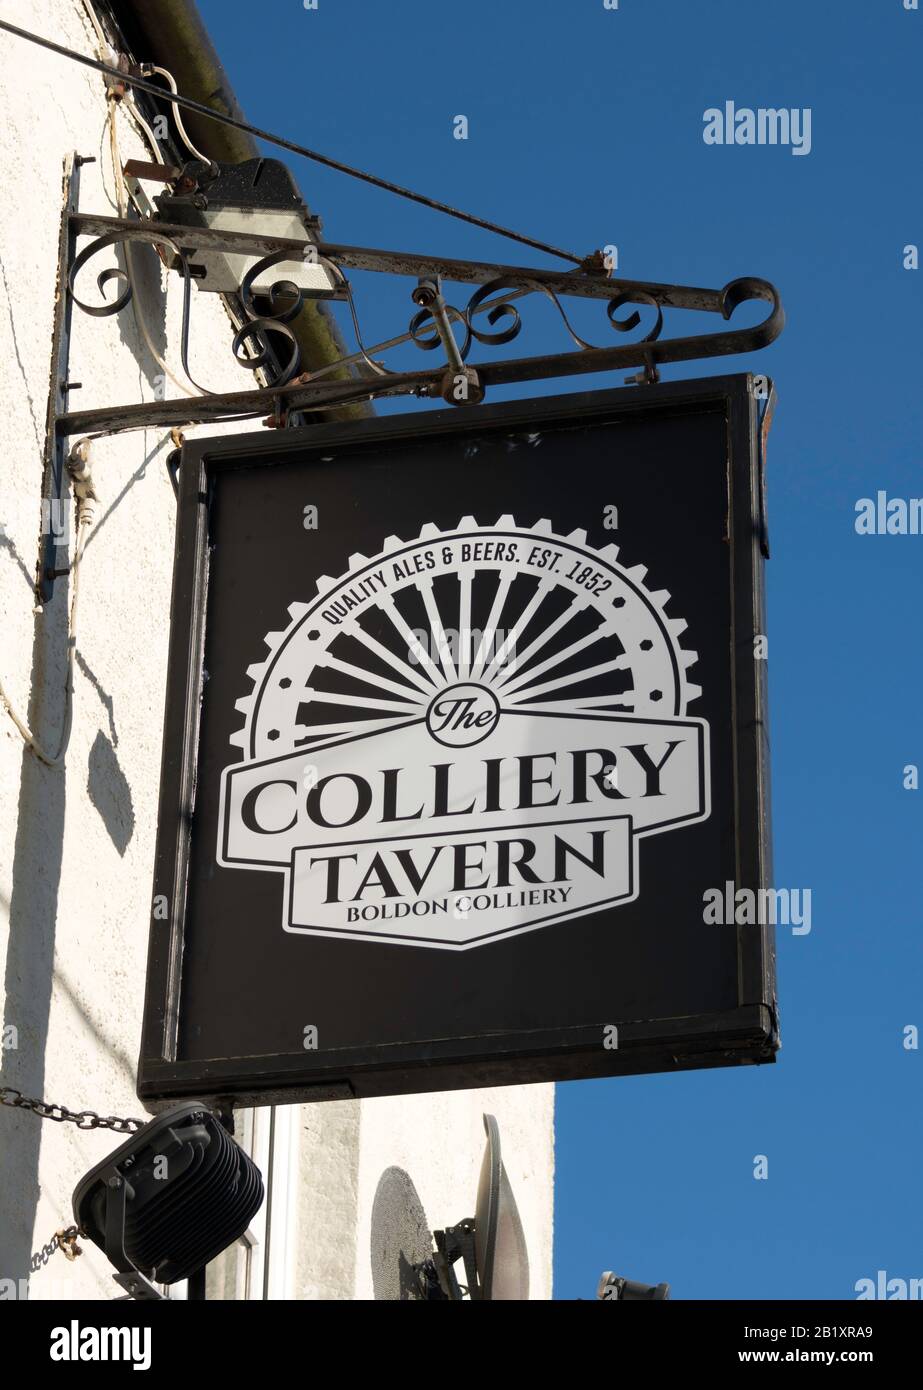 Pub Ssgn the Colliery Tavern in Boldon Colliery, Tyne and Wear, England, UK Stock Photo